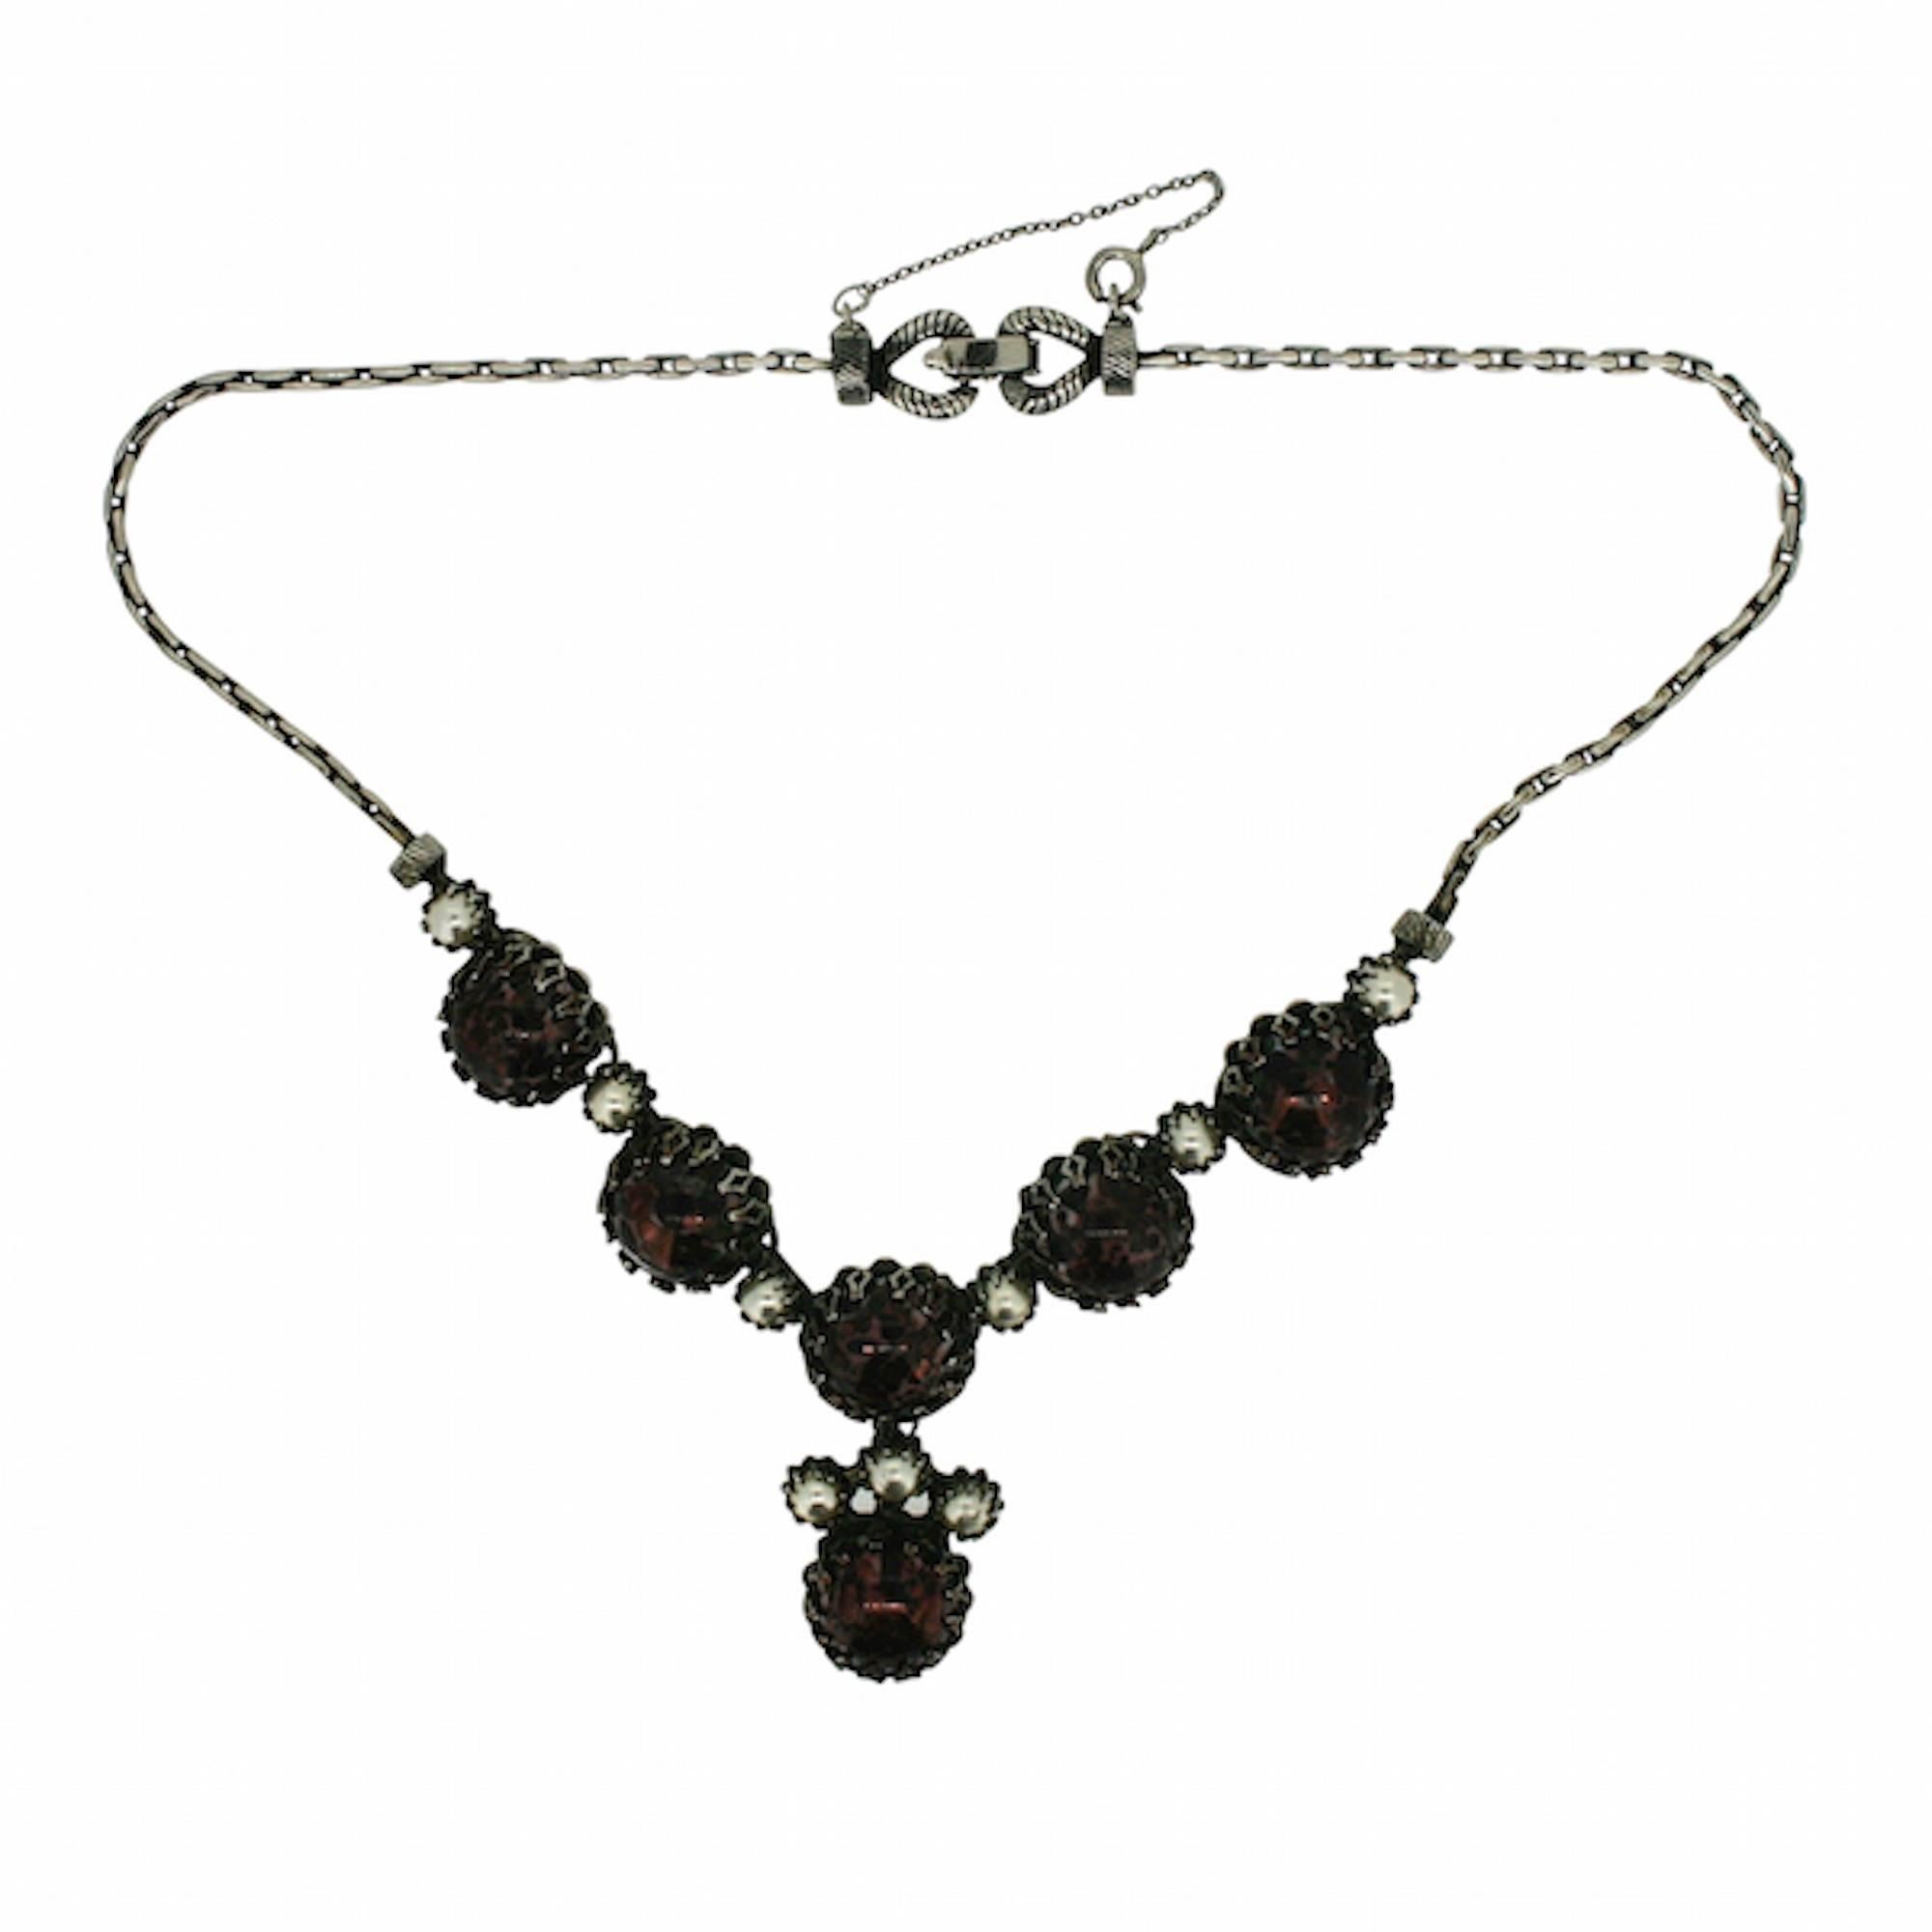 Christian Dior by Mitchel Maer 1950s Vintage Necklace